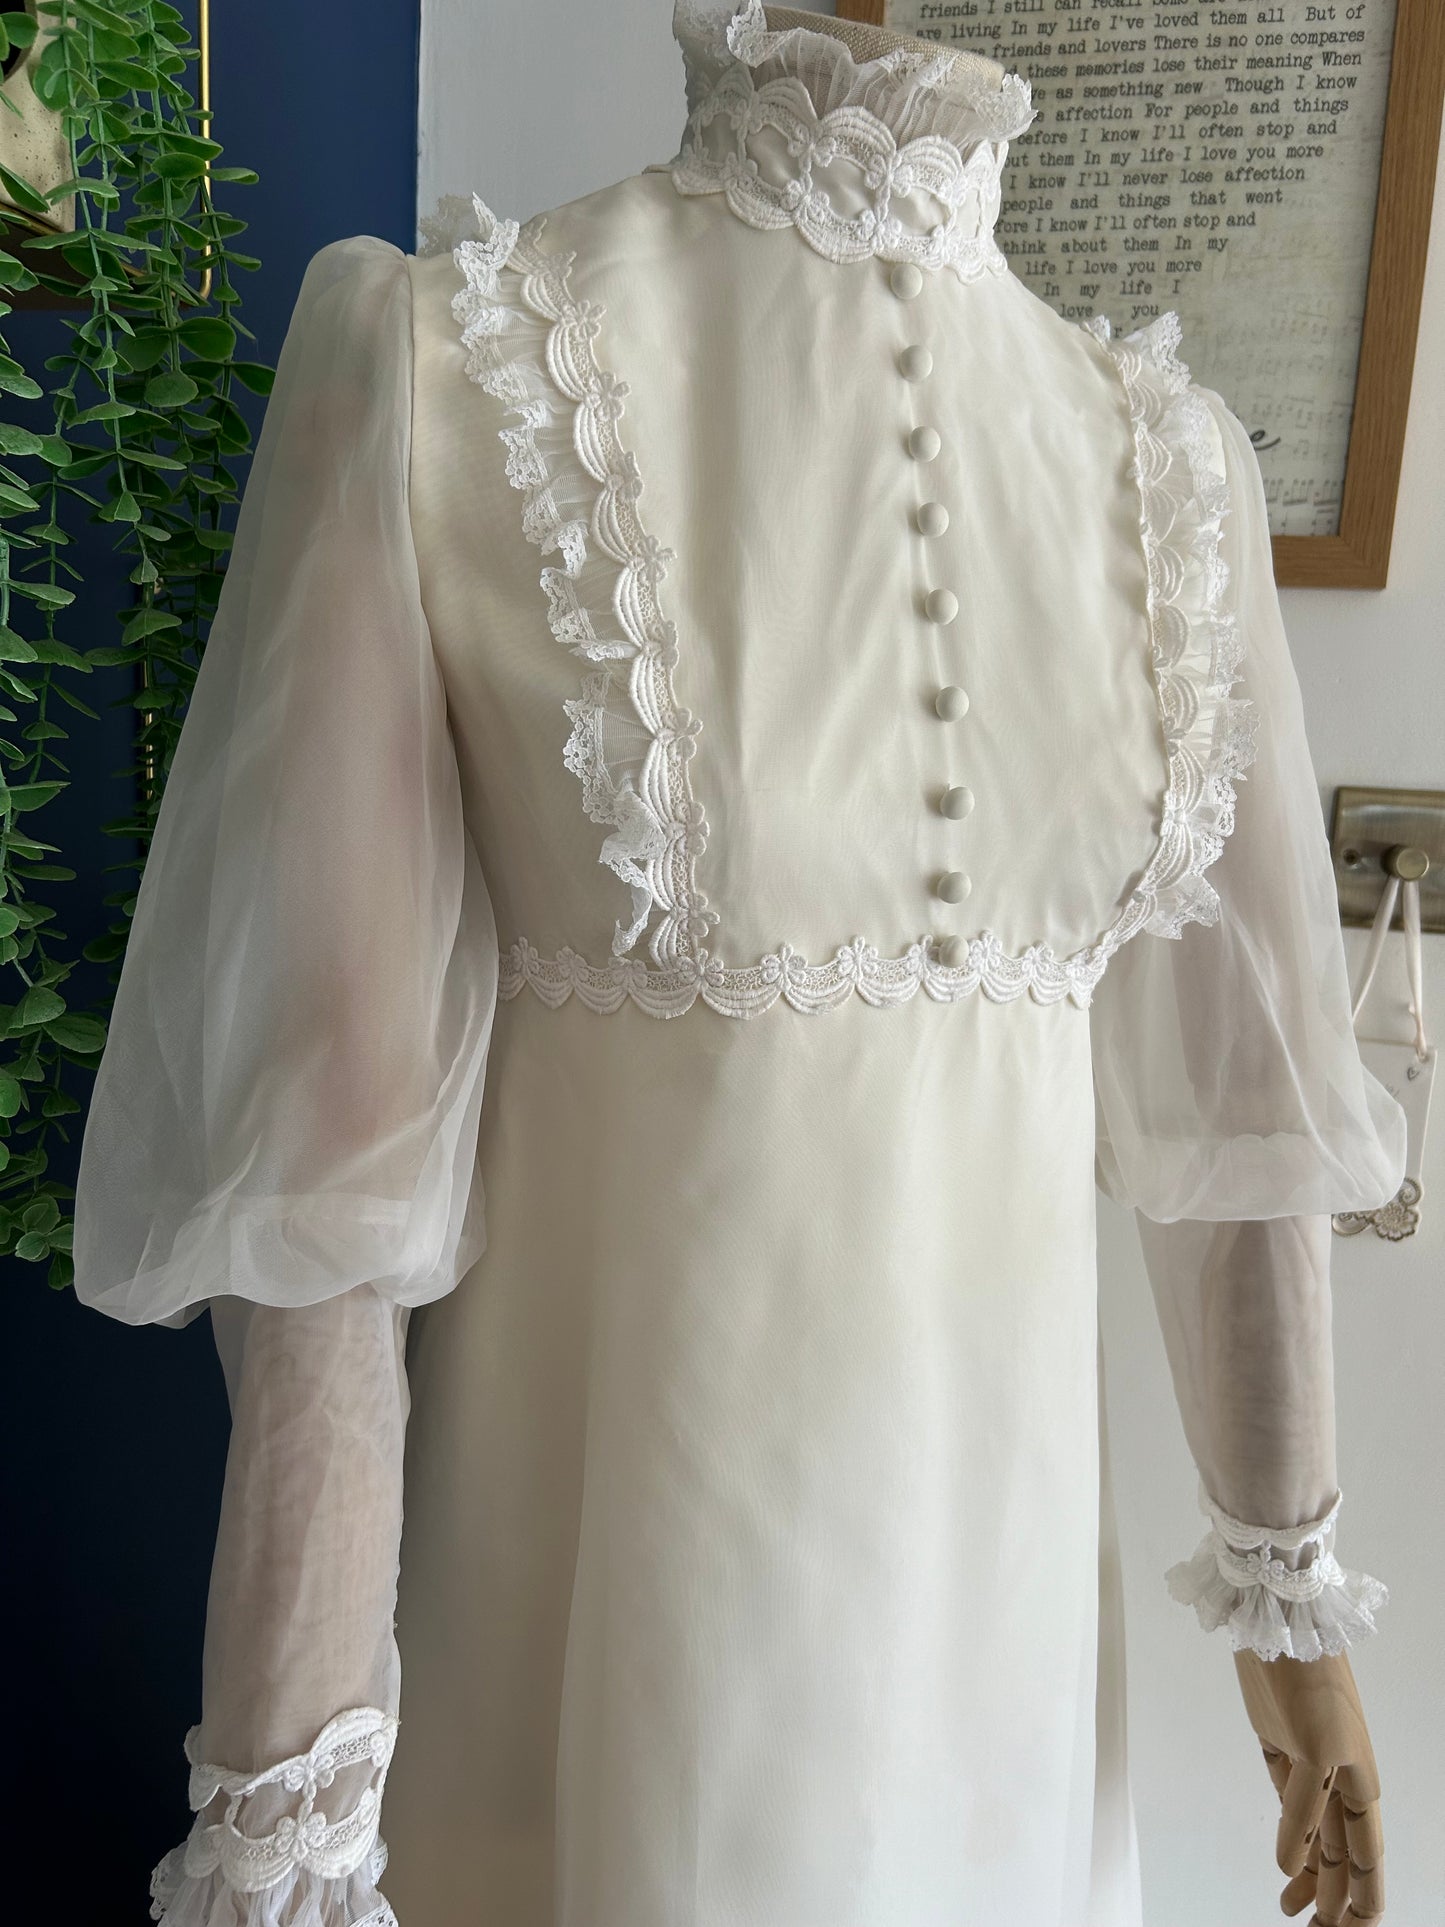 Vintage 1970s ELLIS COUTURE UK Size 10 White Lace Ivory Chiffon Over Sateen Juliet Sleeve Prairie Style Wedding Dress With Small Train